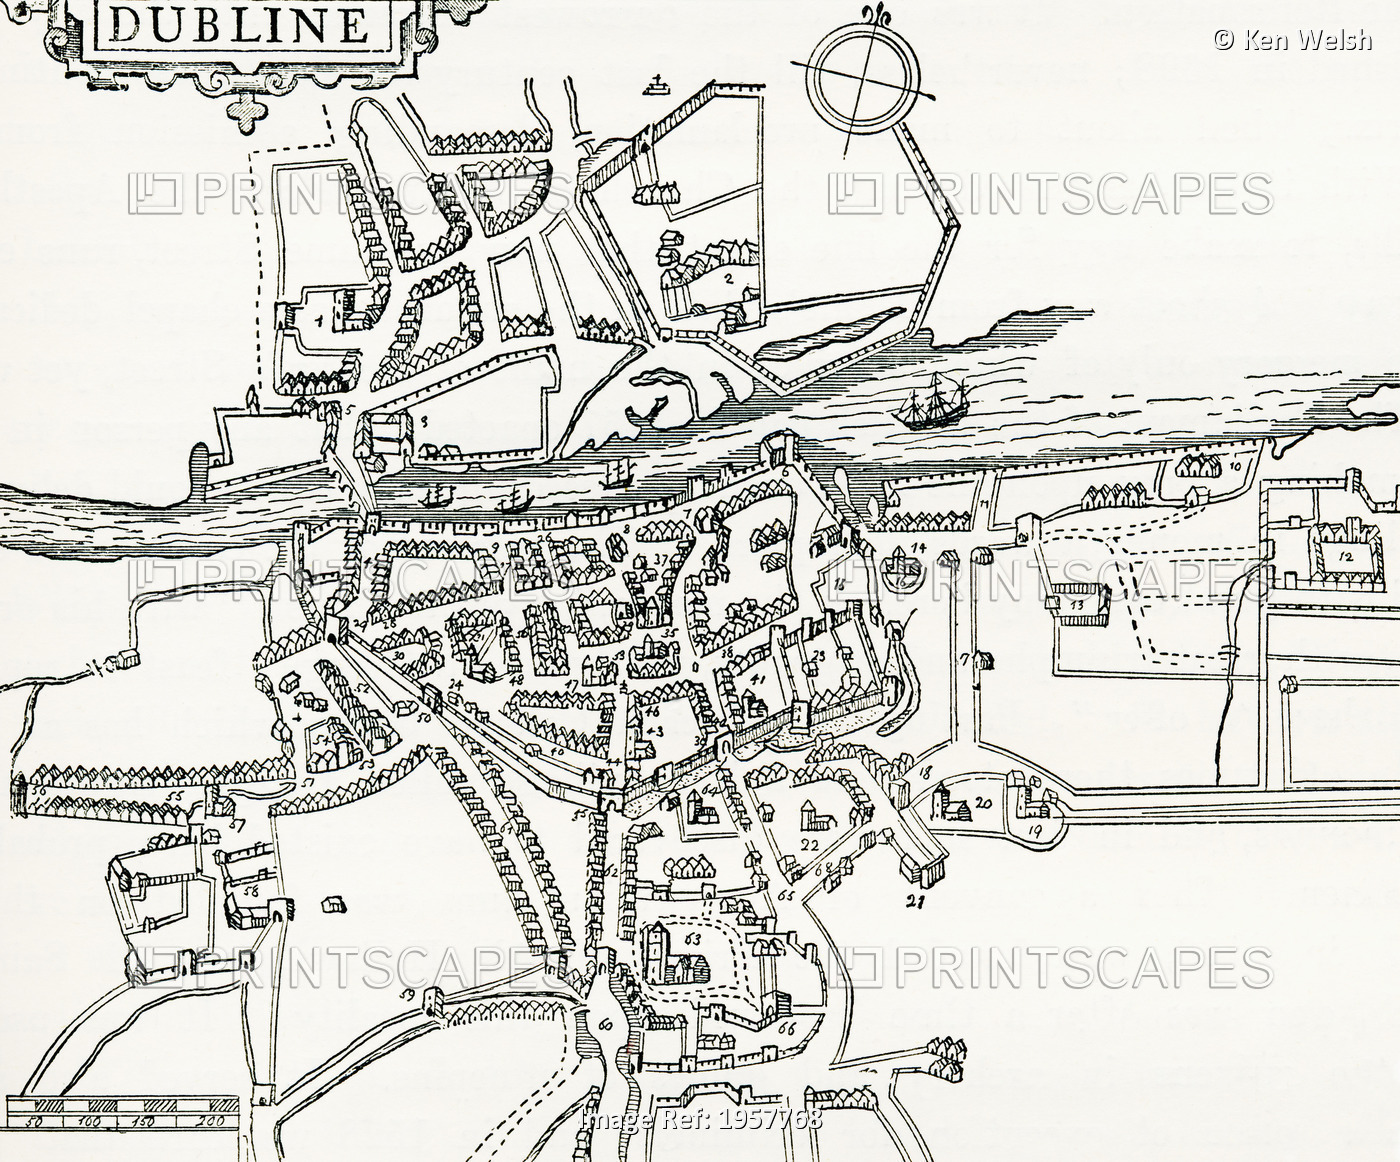 Map Of Dublin, Ireland In 1610. From Our Own Country Published 1898.